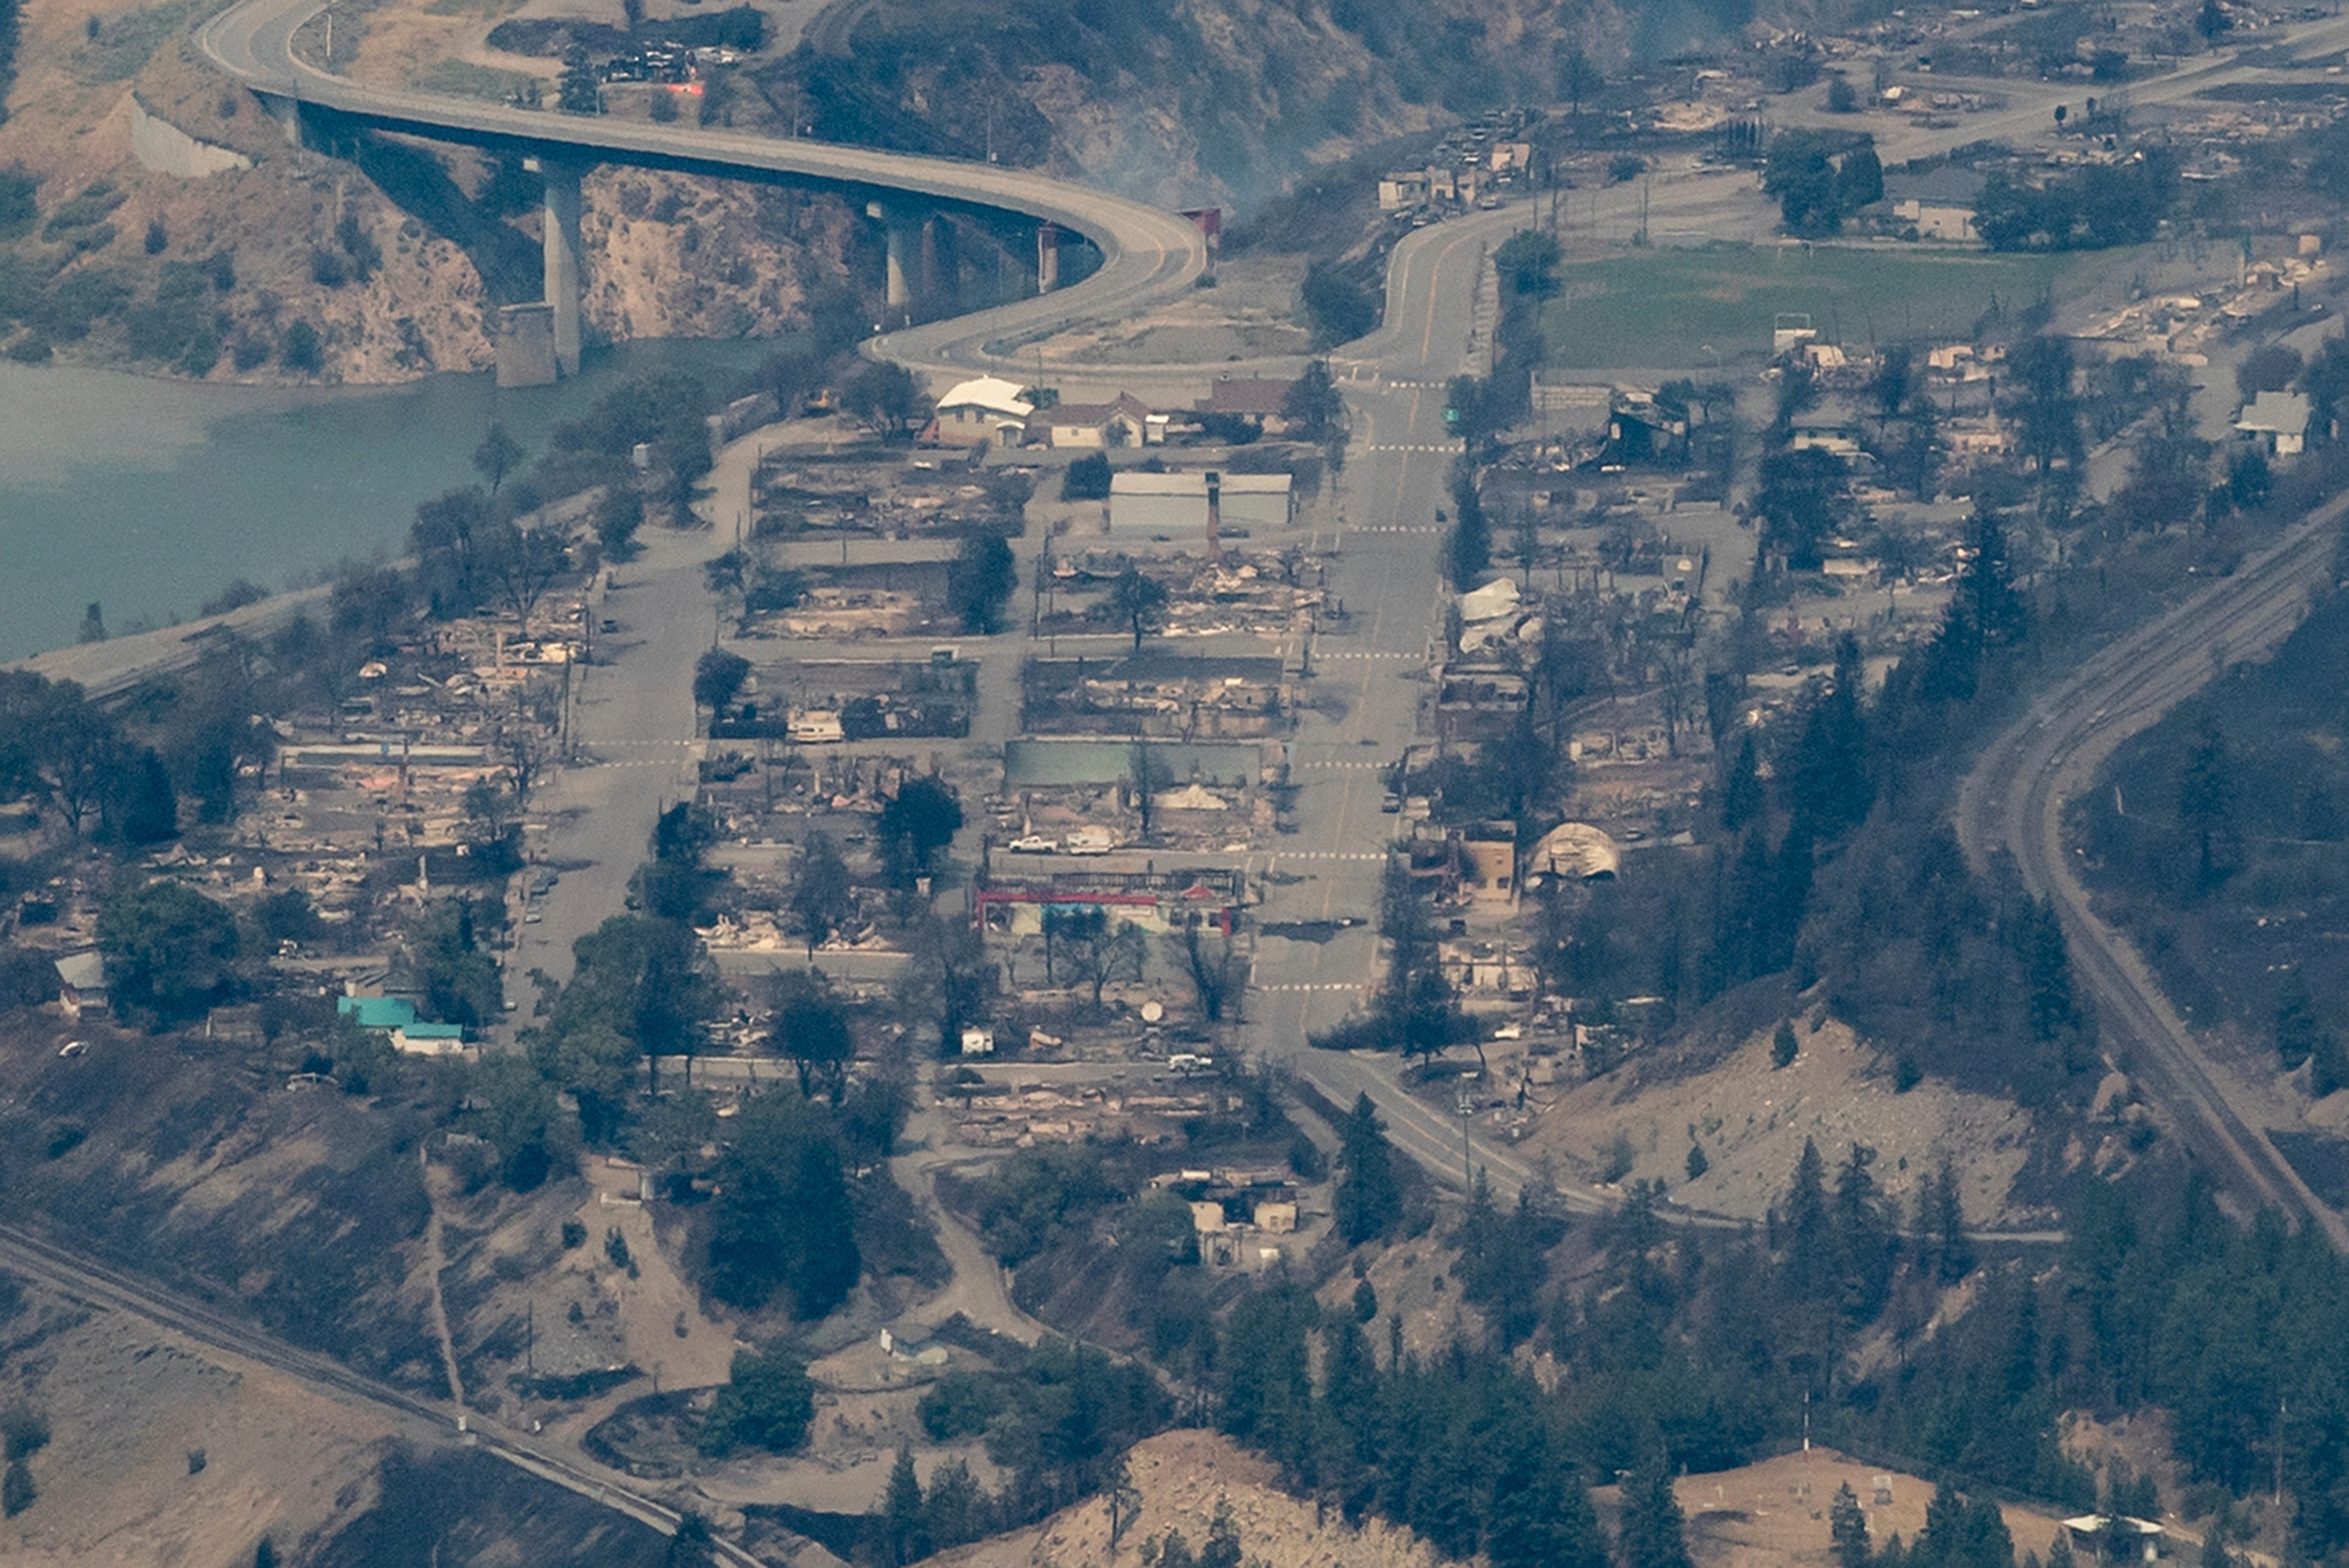 Public officials have said the village of Lytton in British Columbia is almost completely destroyed following wildfires